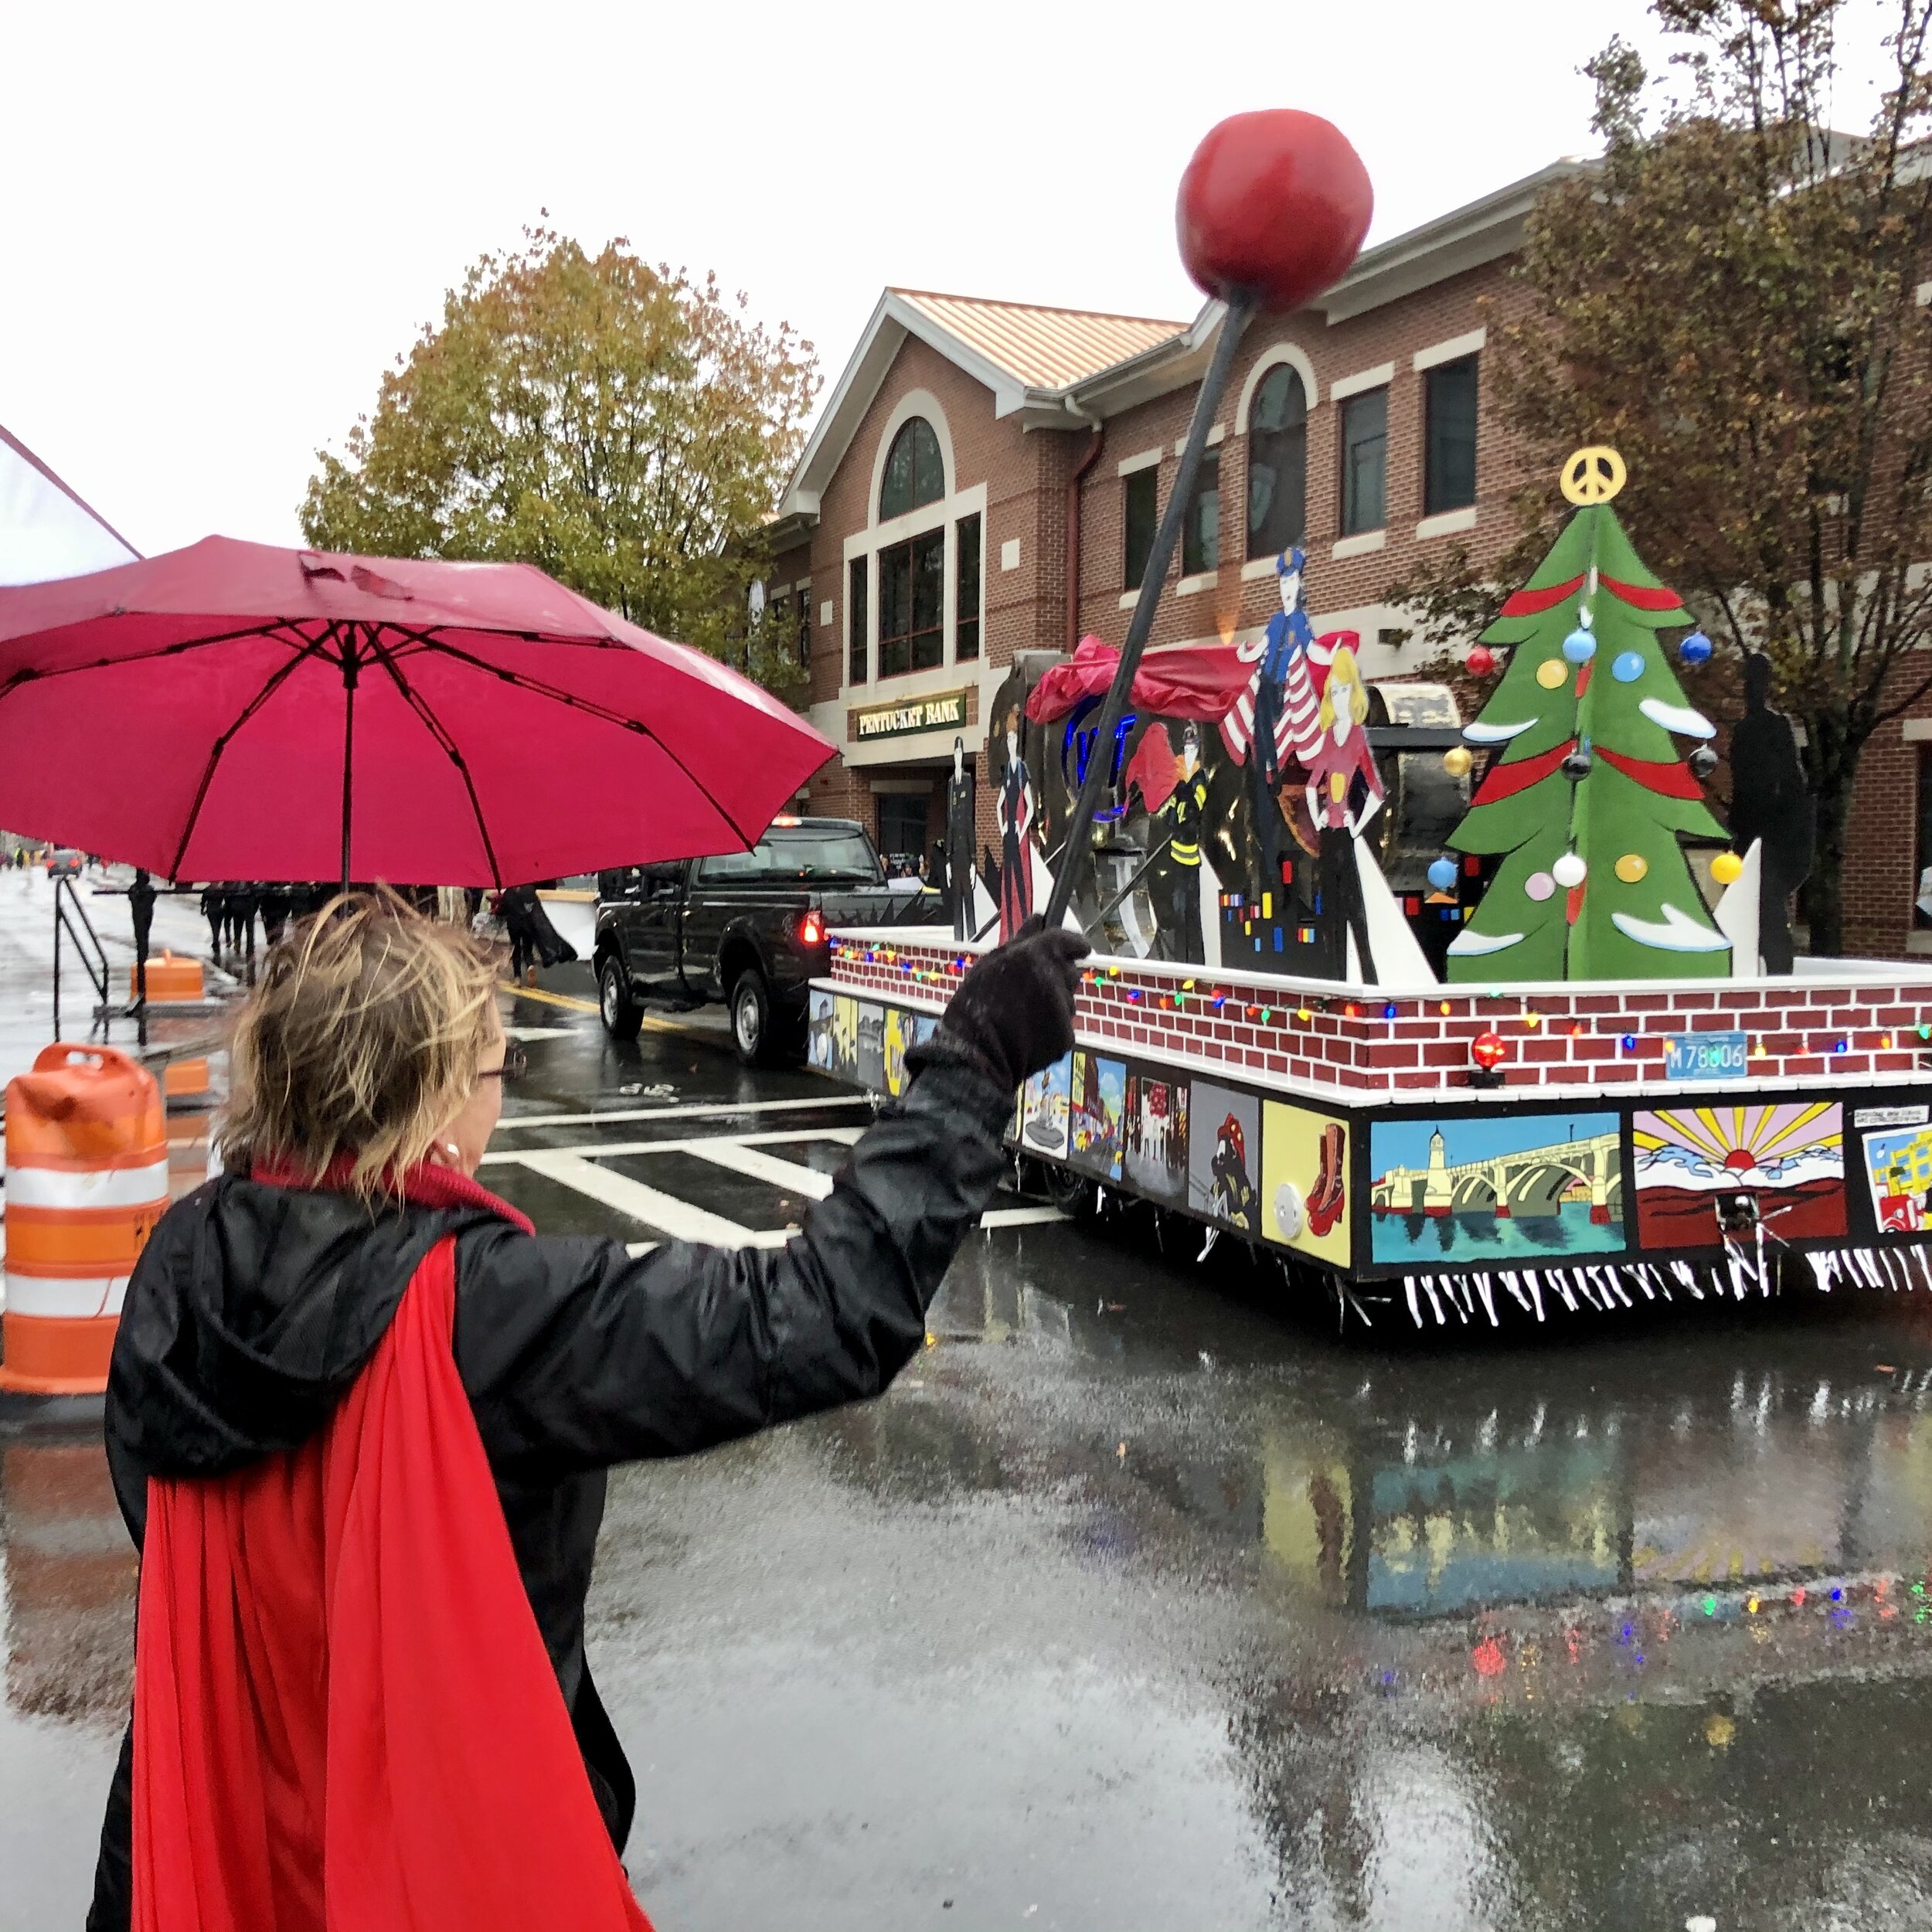 Whittier float wins First Place in Haverhill VFW Santa Parade